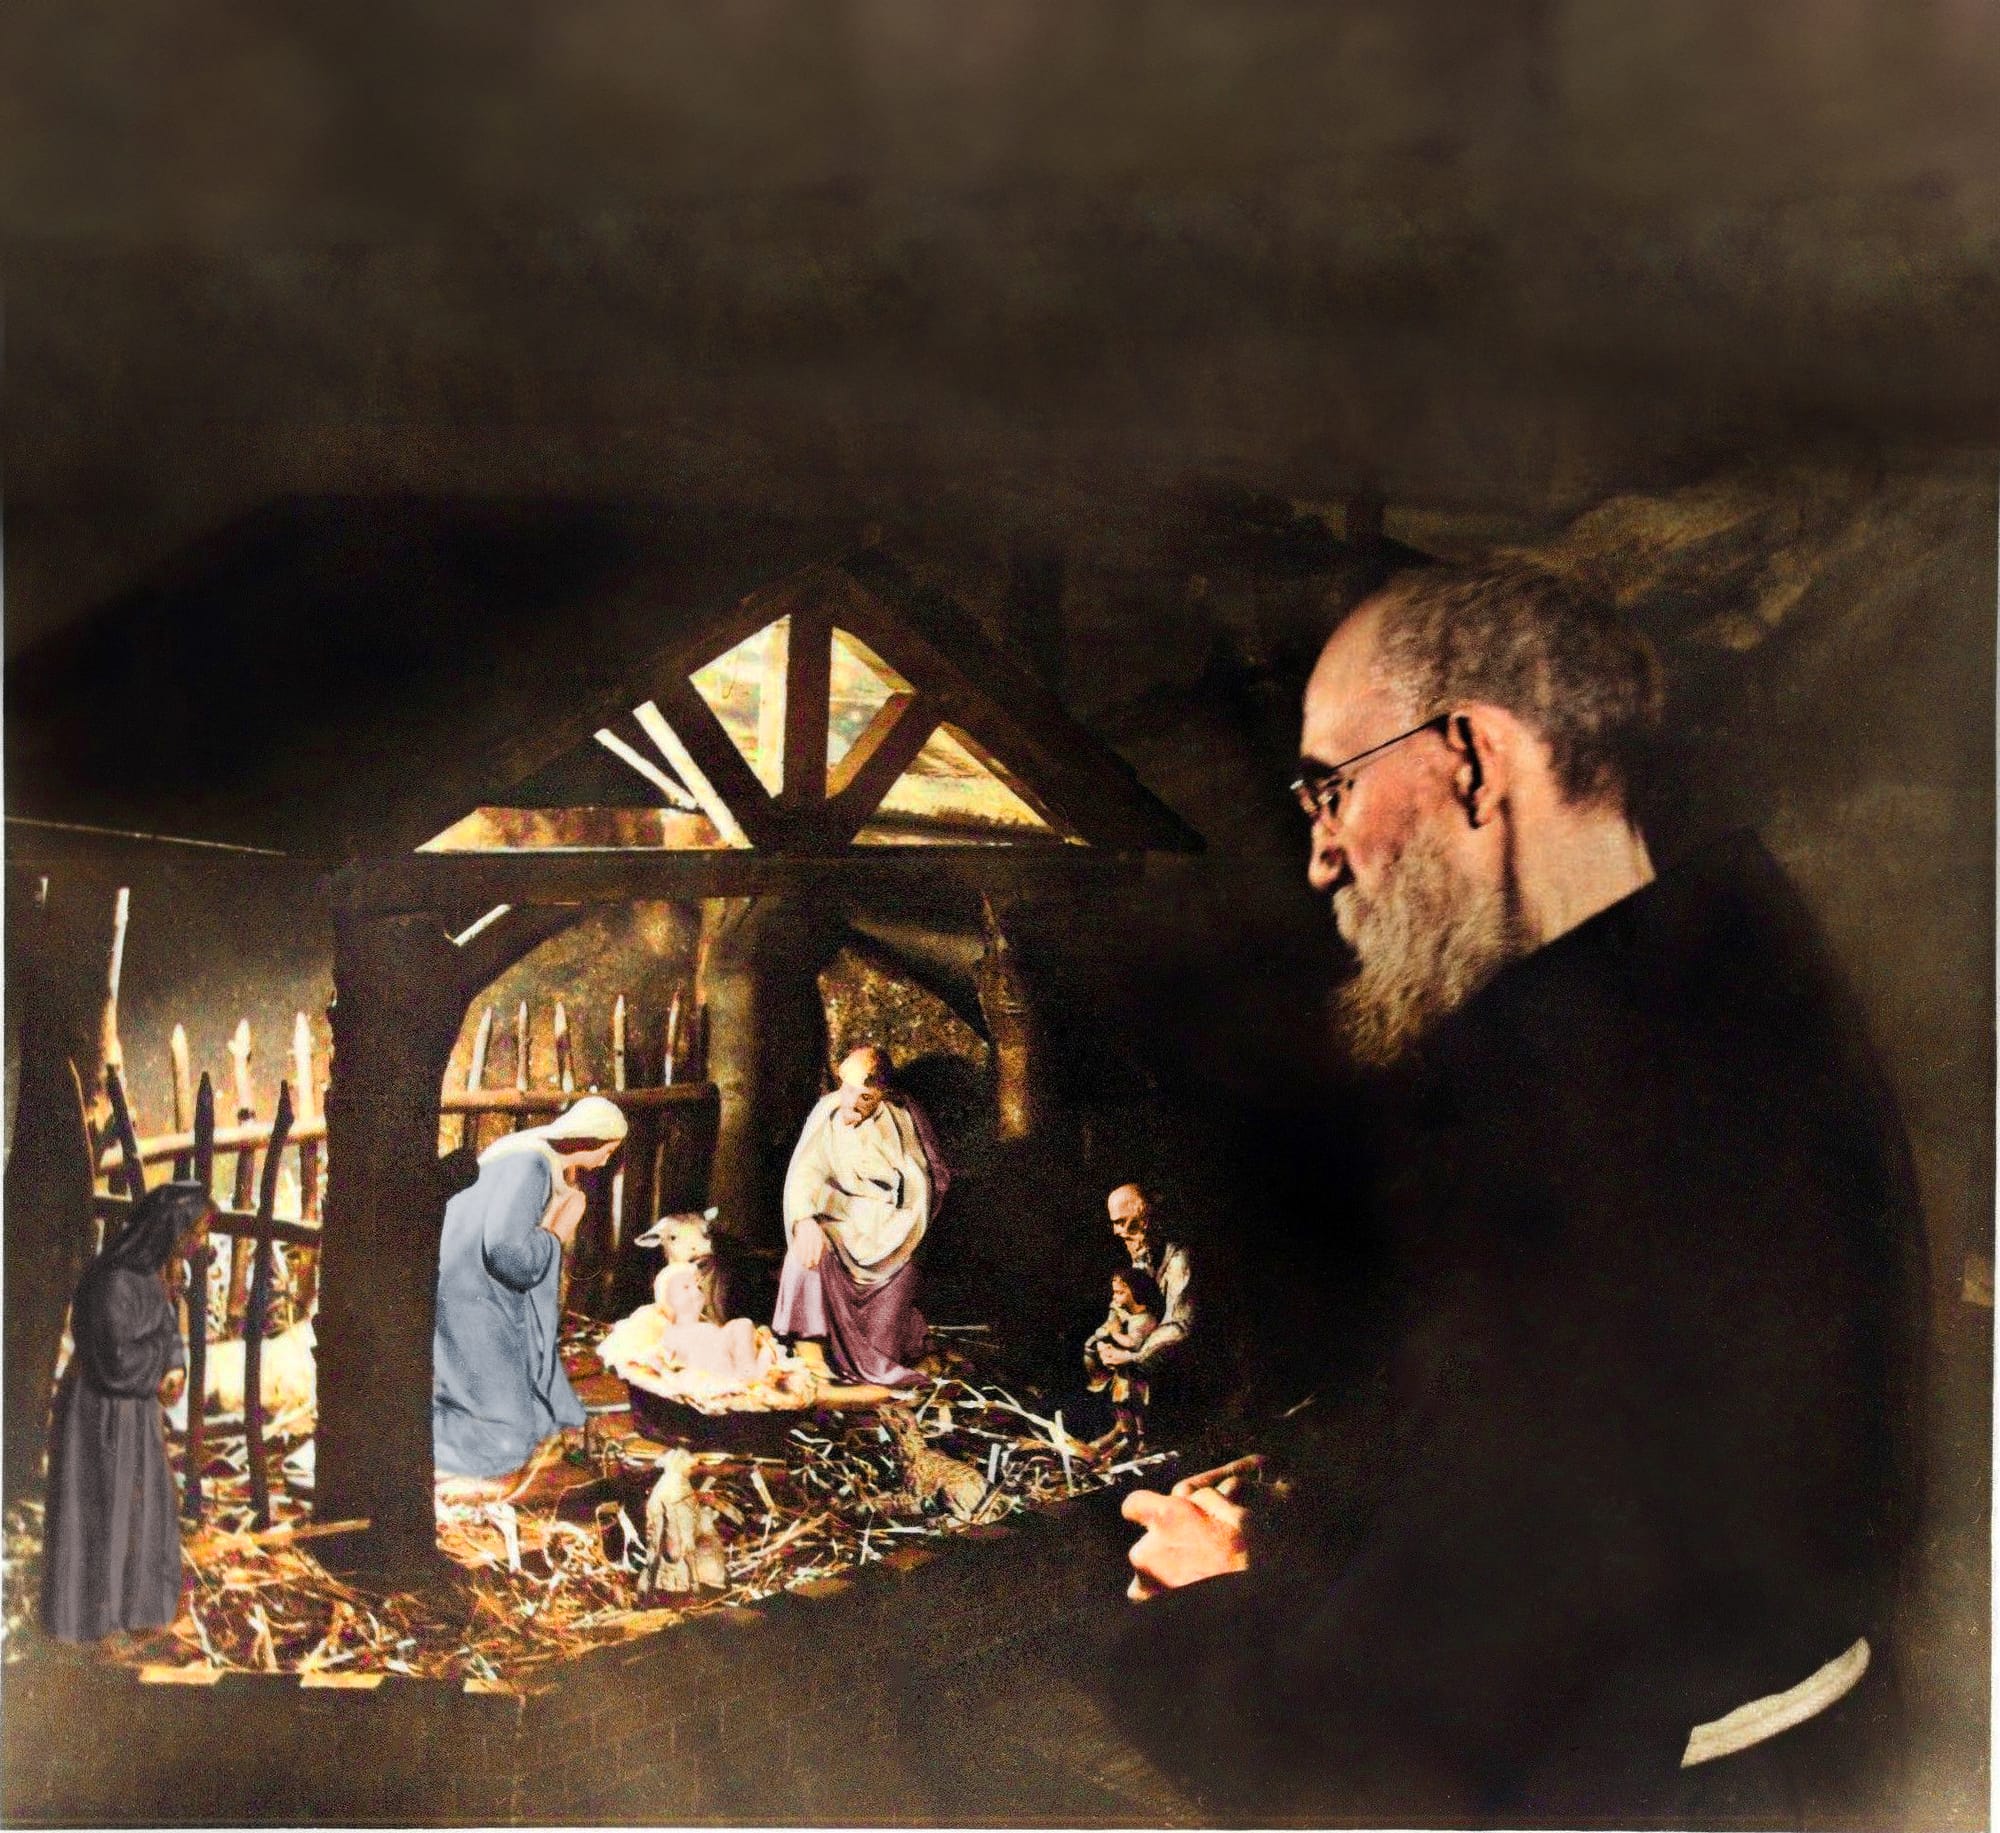 A colorized photograph of Blessed Solanus Casey praying at the creche in 1944.